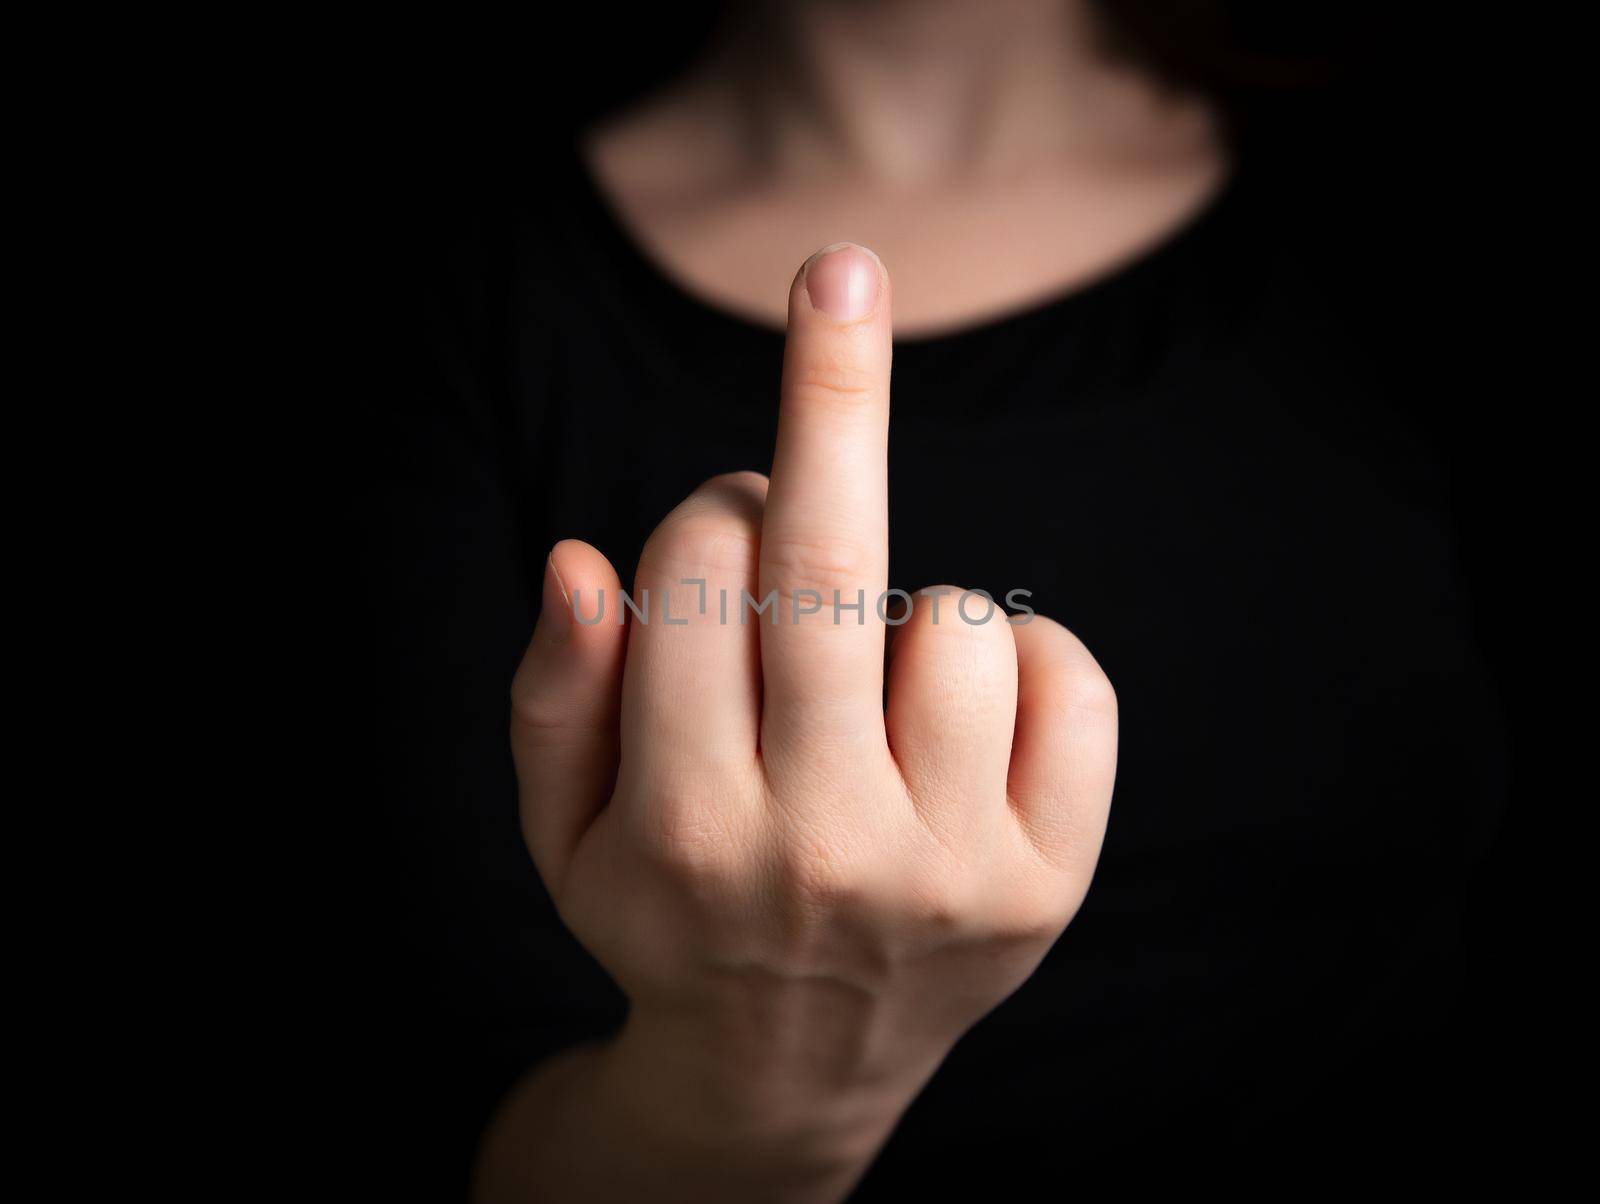 Hand flipping the finger,middle finger up,hand gesturing on dark background, agression,angry,hand, fuck off symbol concept by Annebel146